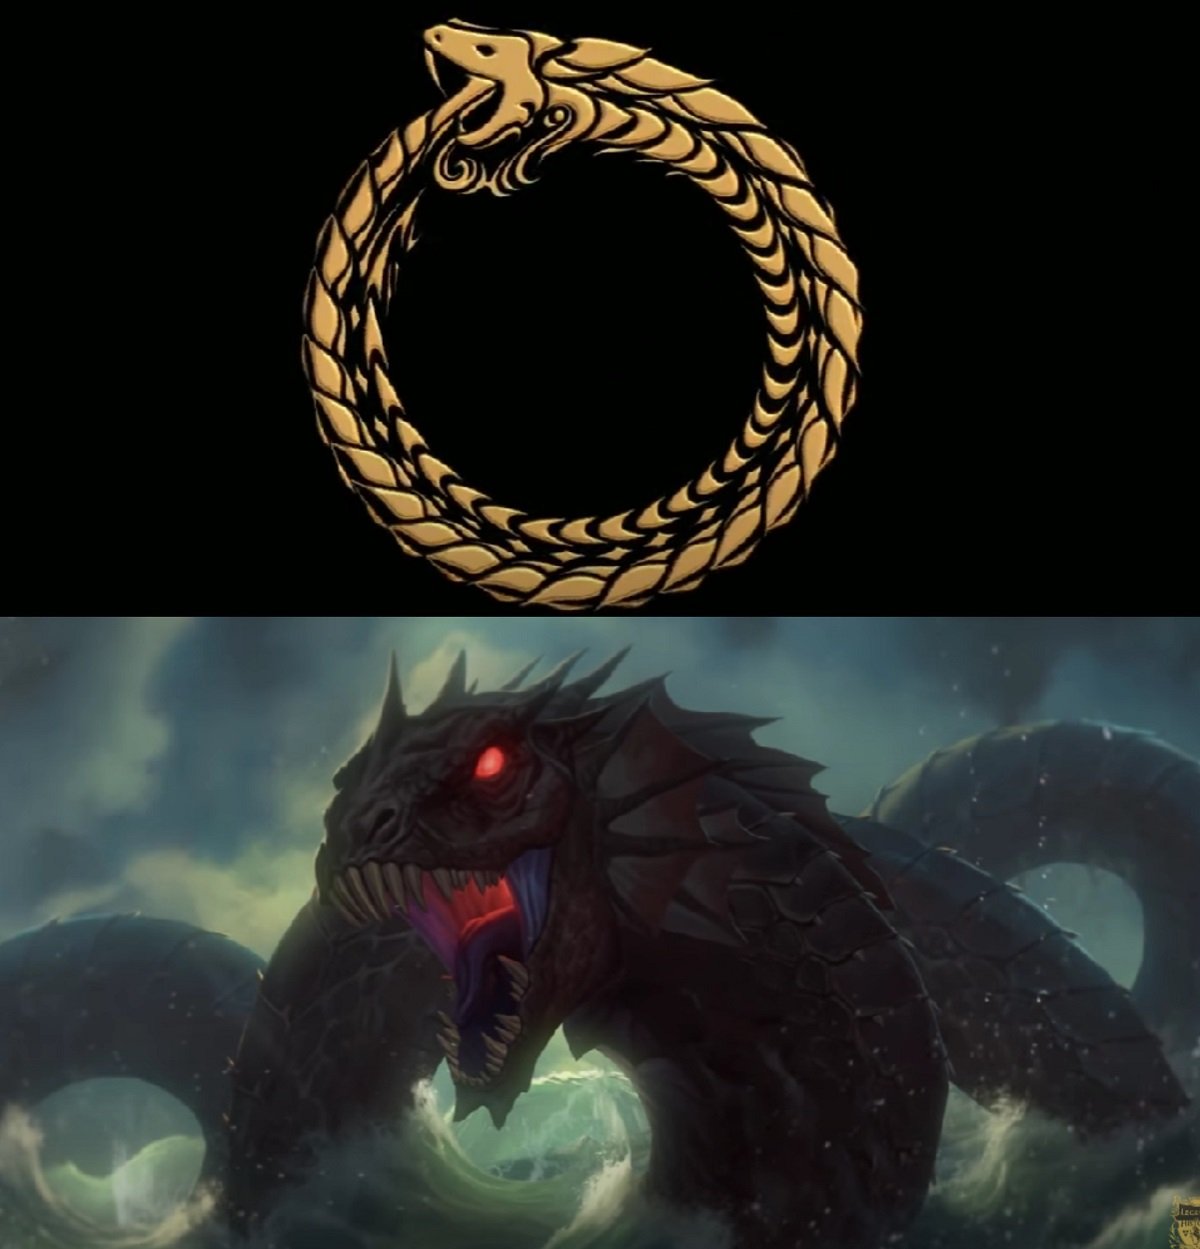 The ancient symbol of Ouroboros, the snake devouring its tail, and the Norse myth of the Midgard Serpent. 